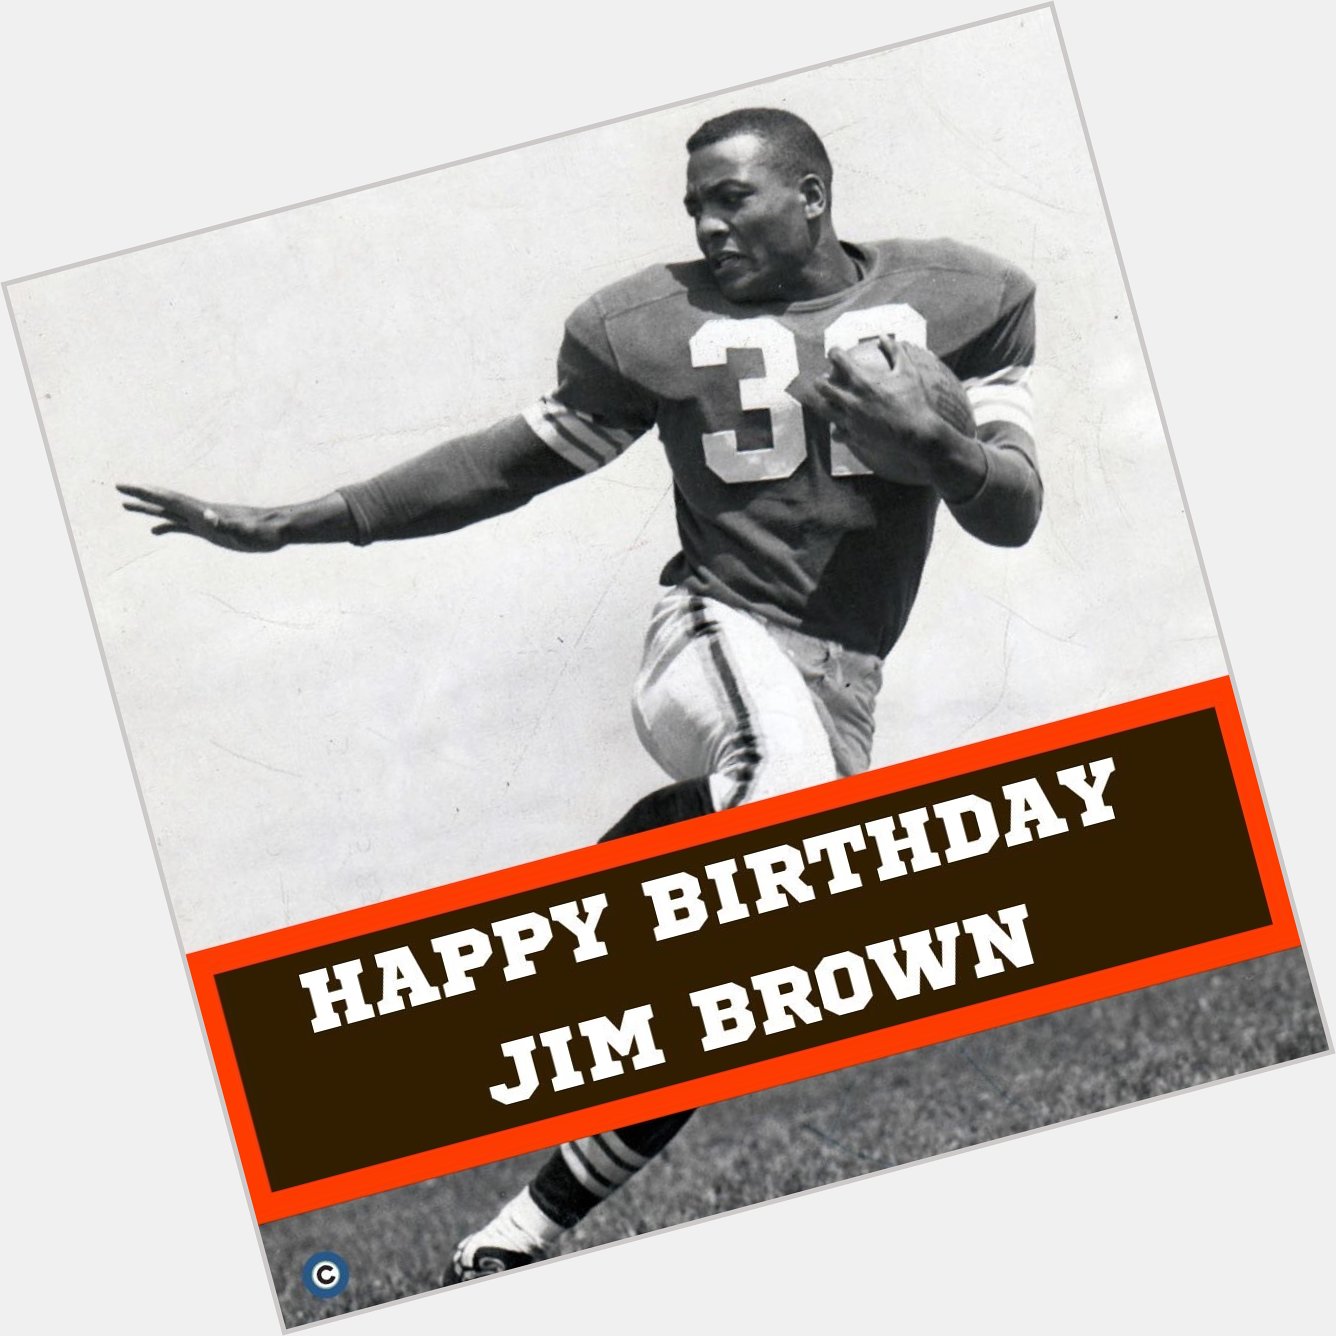 Cleveland Browns legend Jim Brown is 83 years old today!  happy Birthday Jim! 